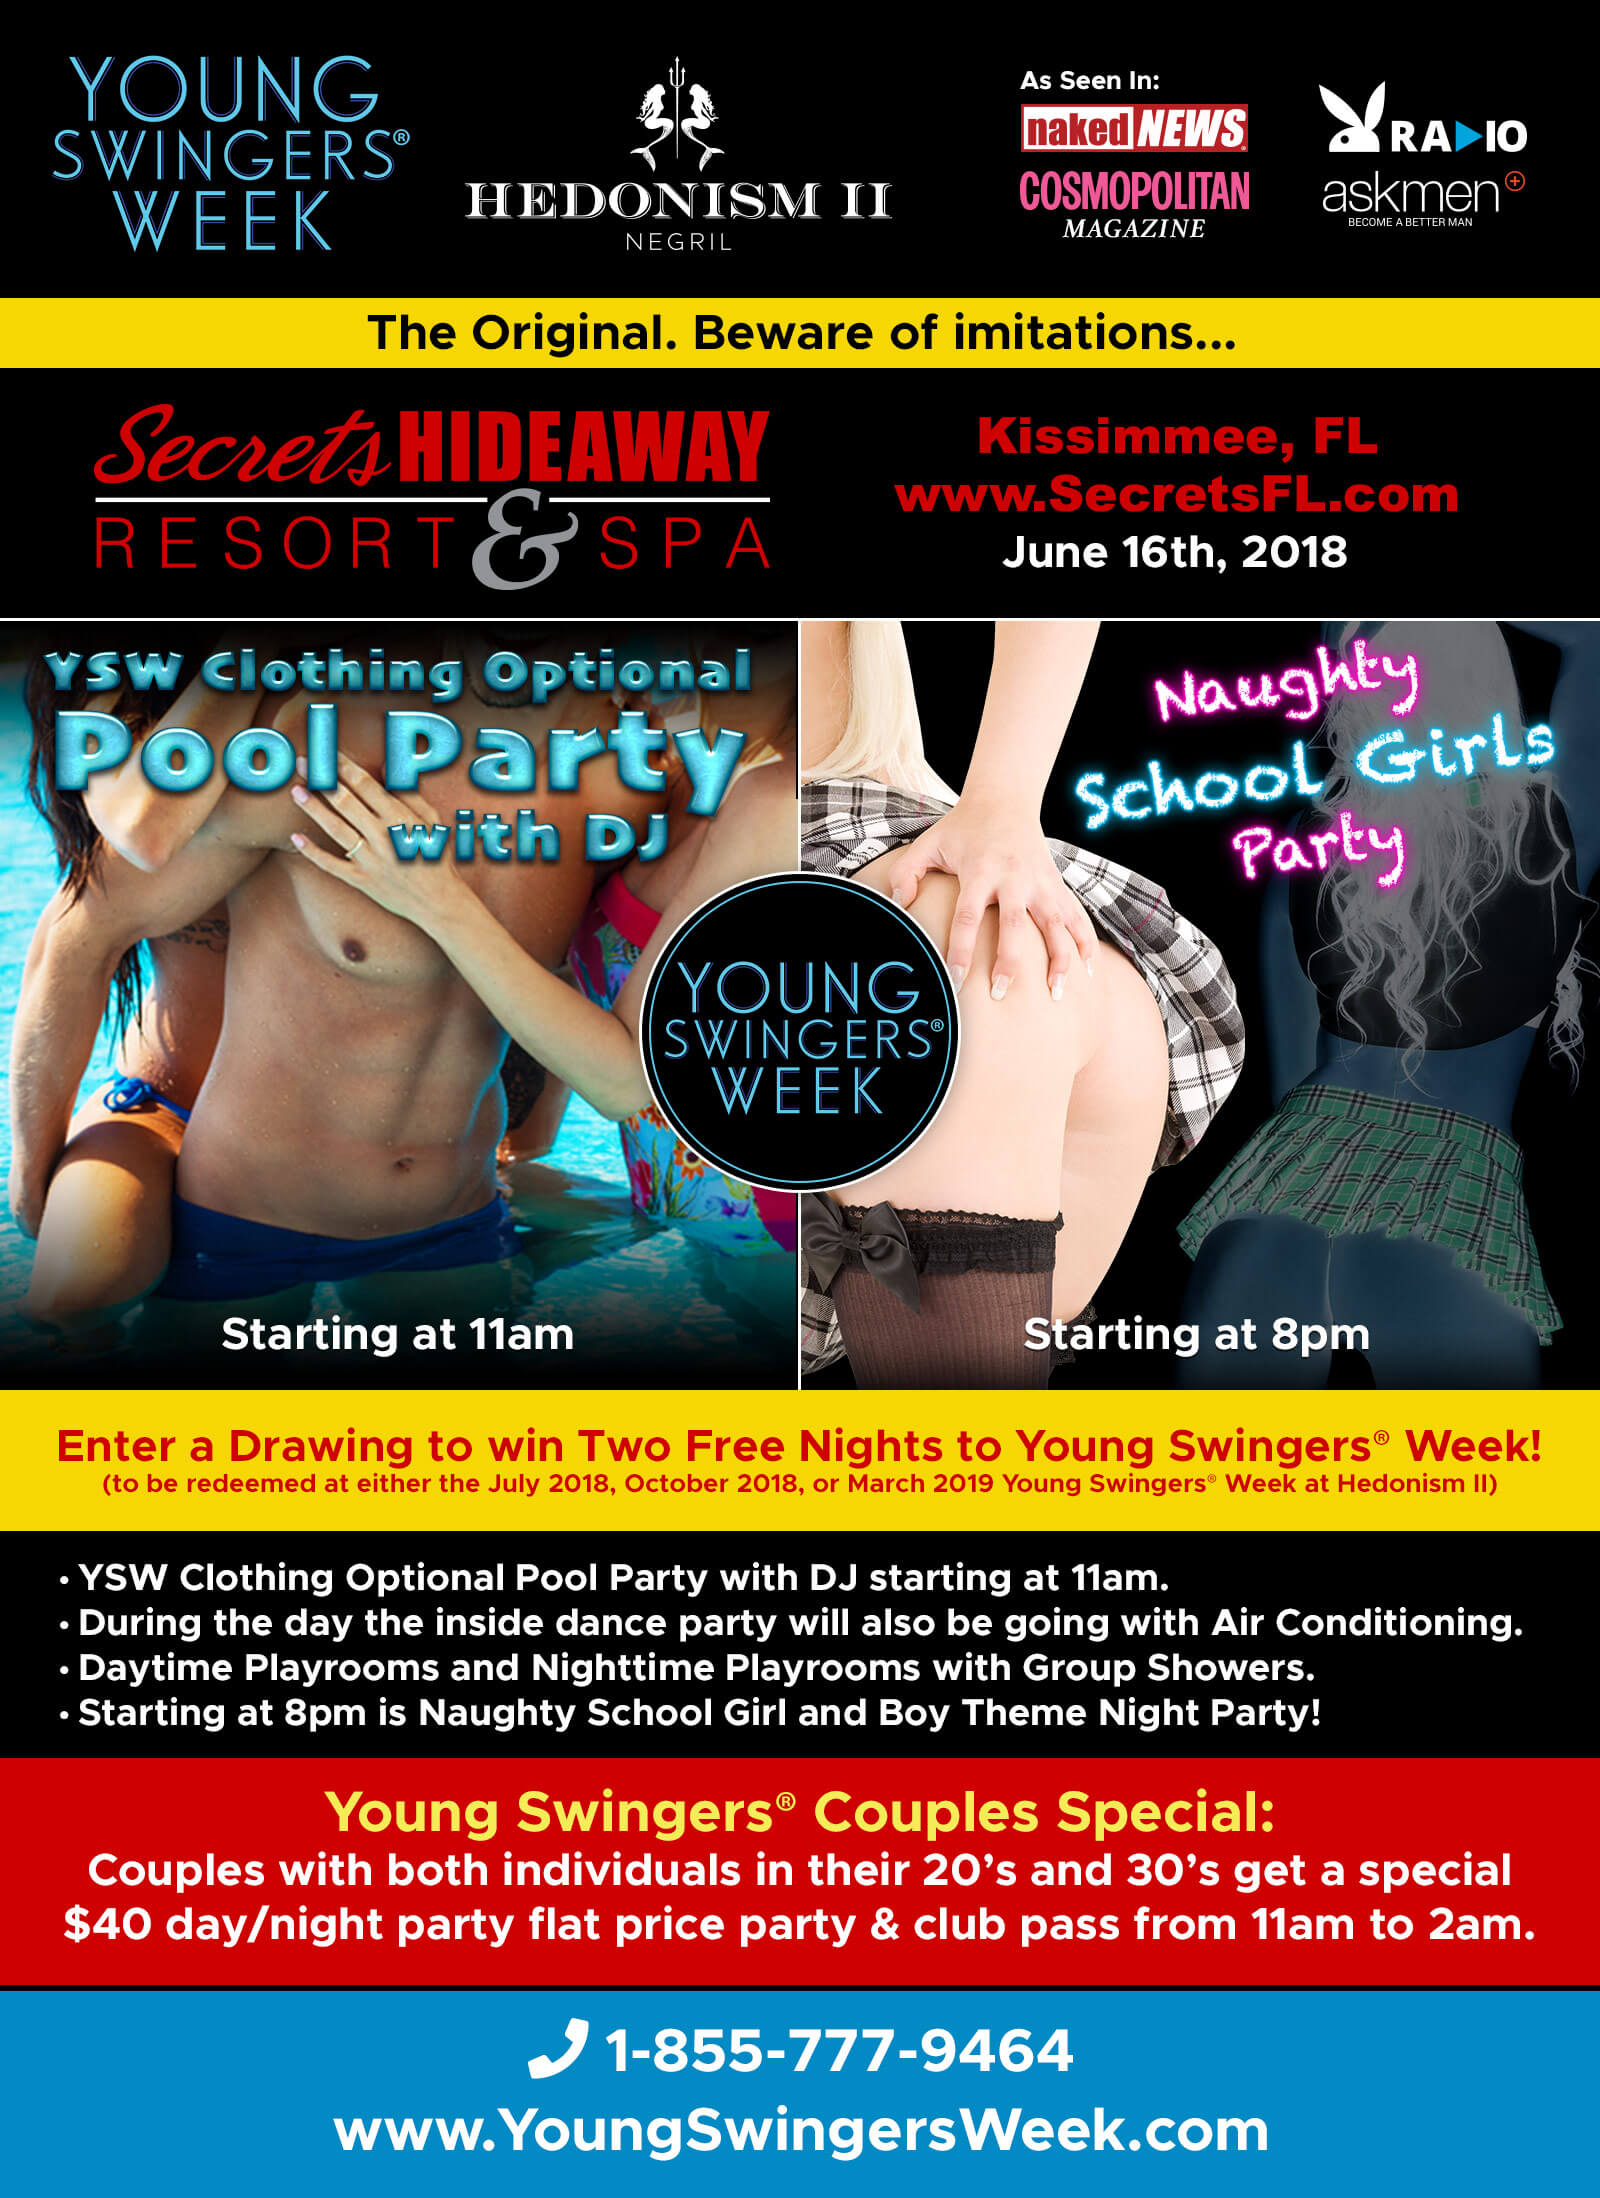 Young Swingers® Sponsored Party at Club Secret in Kissimmee, Florida